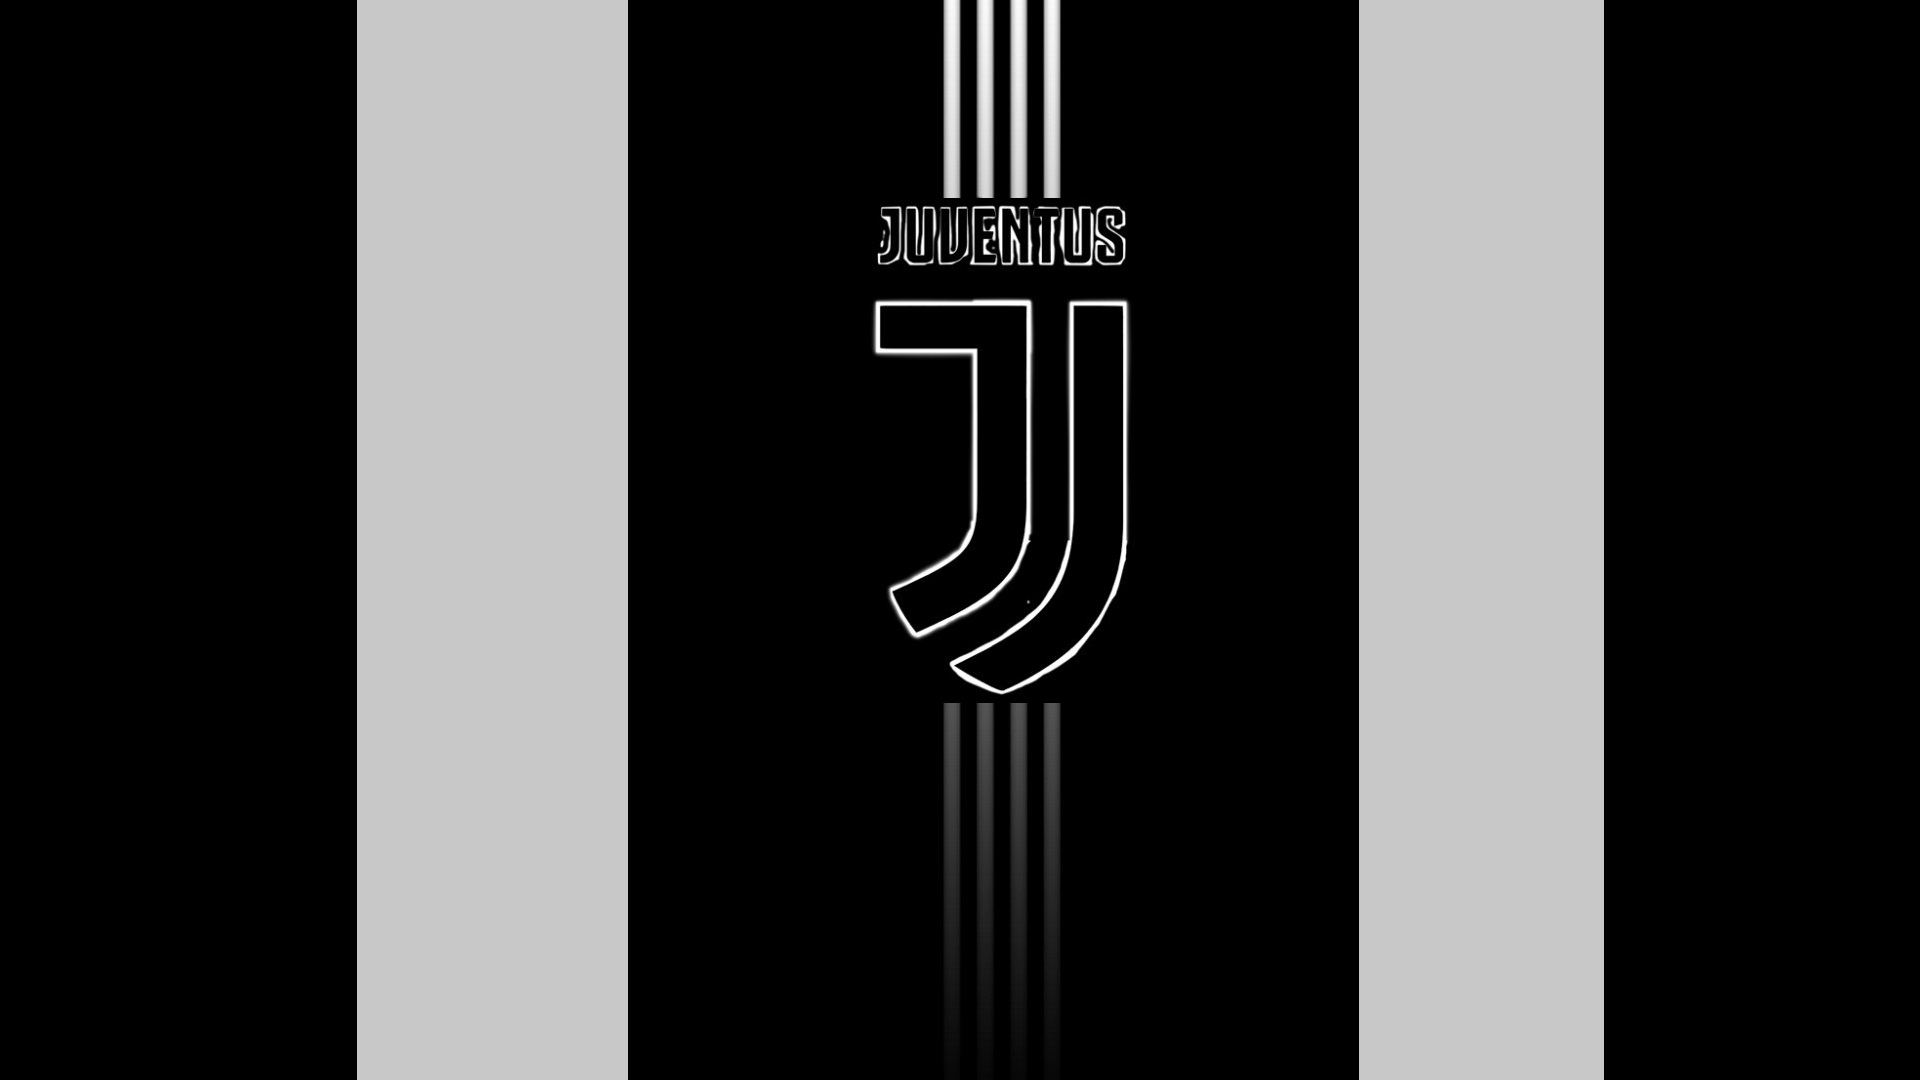 Juventus HD Wallpapers With Resolution 1920X1080 pixel. You can make this wallpaper for your Mac or Windows Desktop Background, iPhone, Android or Tablet and another Smartphone device for free